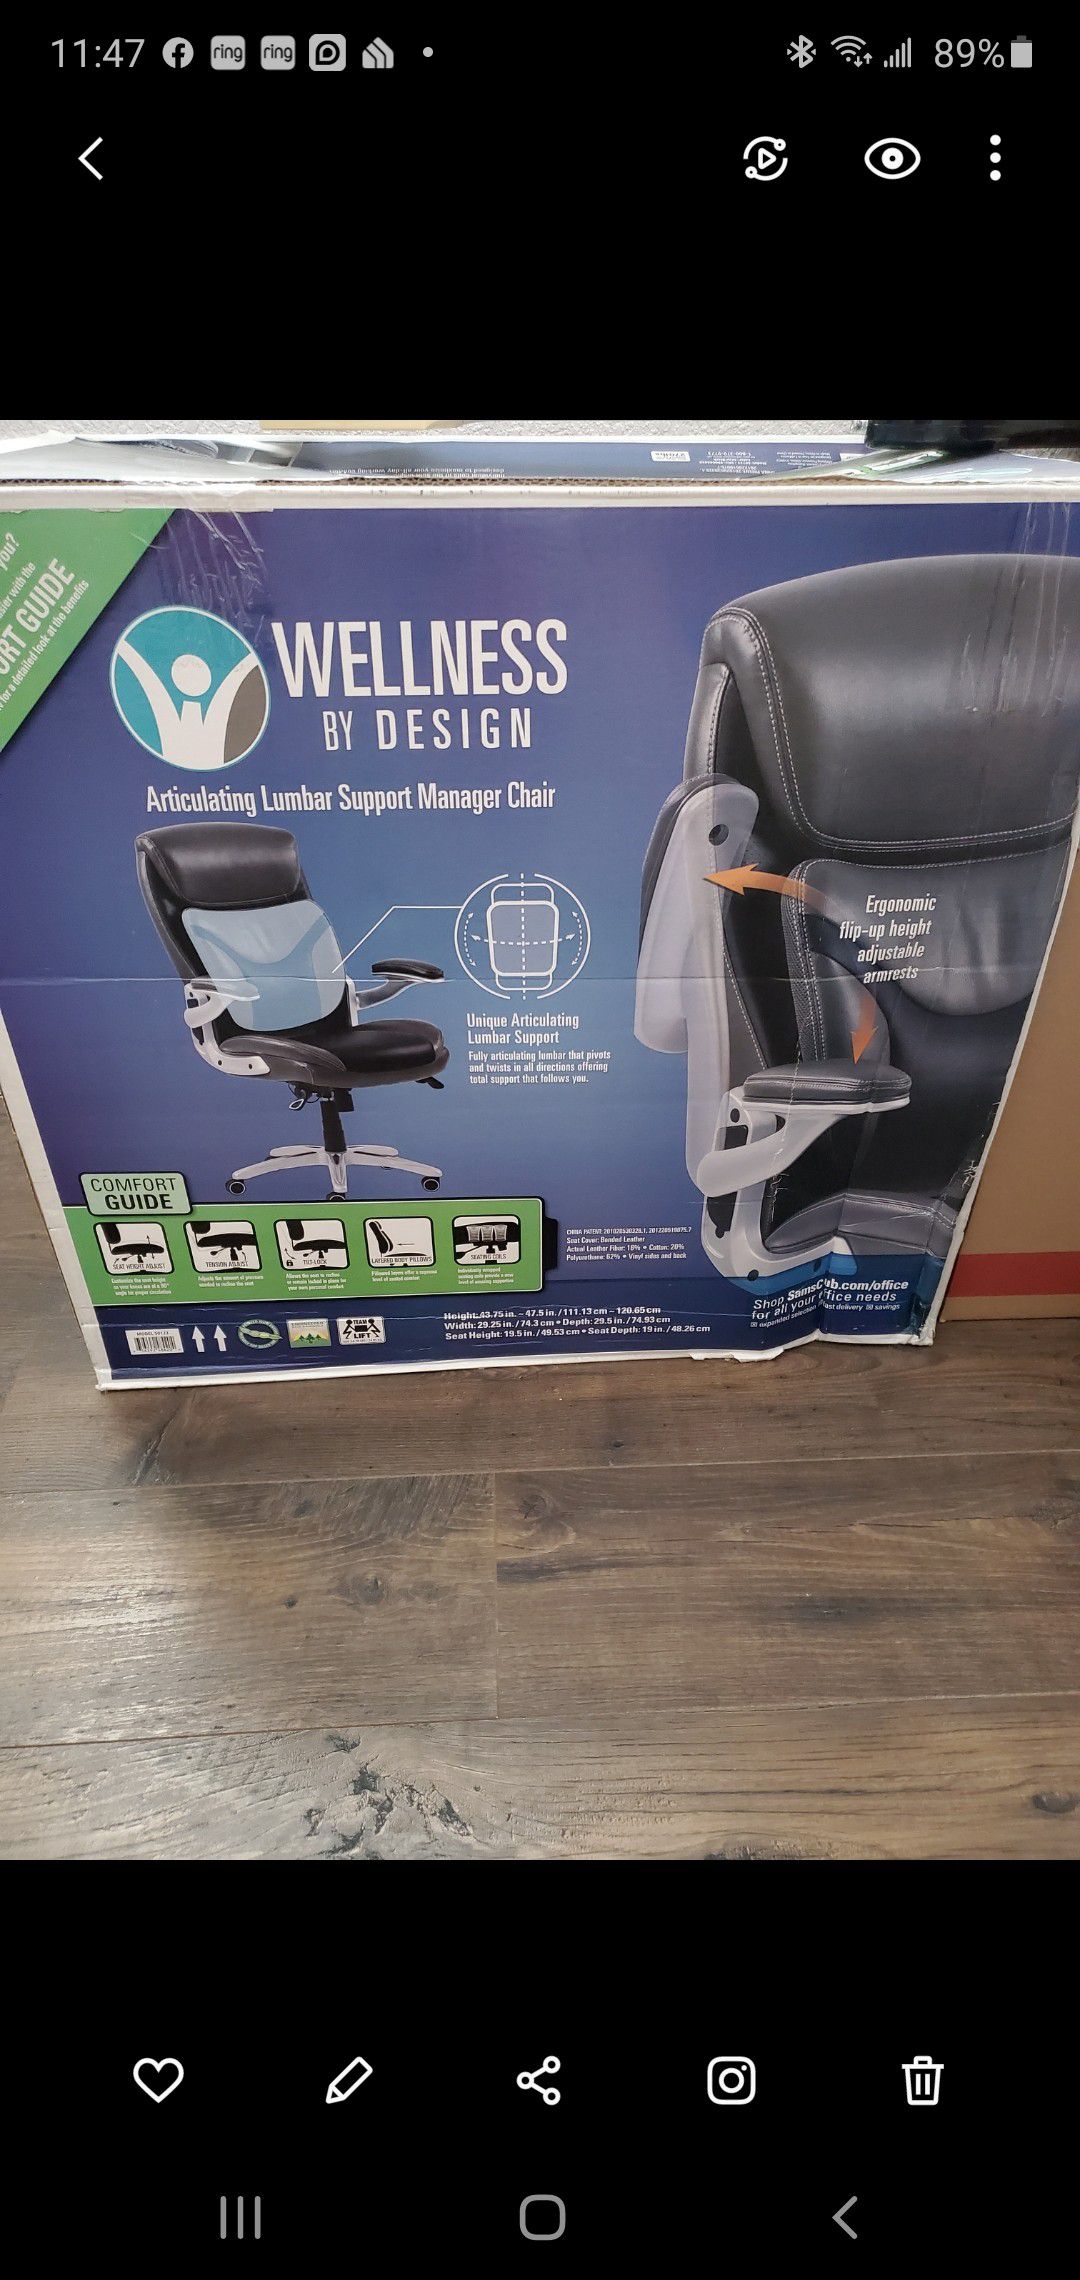 Wellness by Design Manager Chair